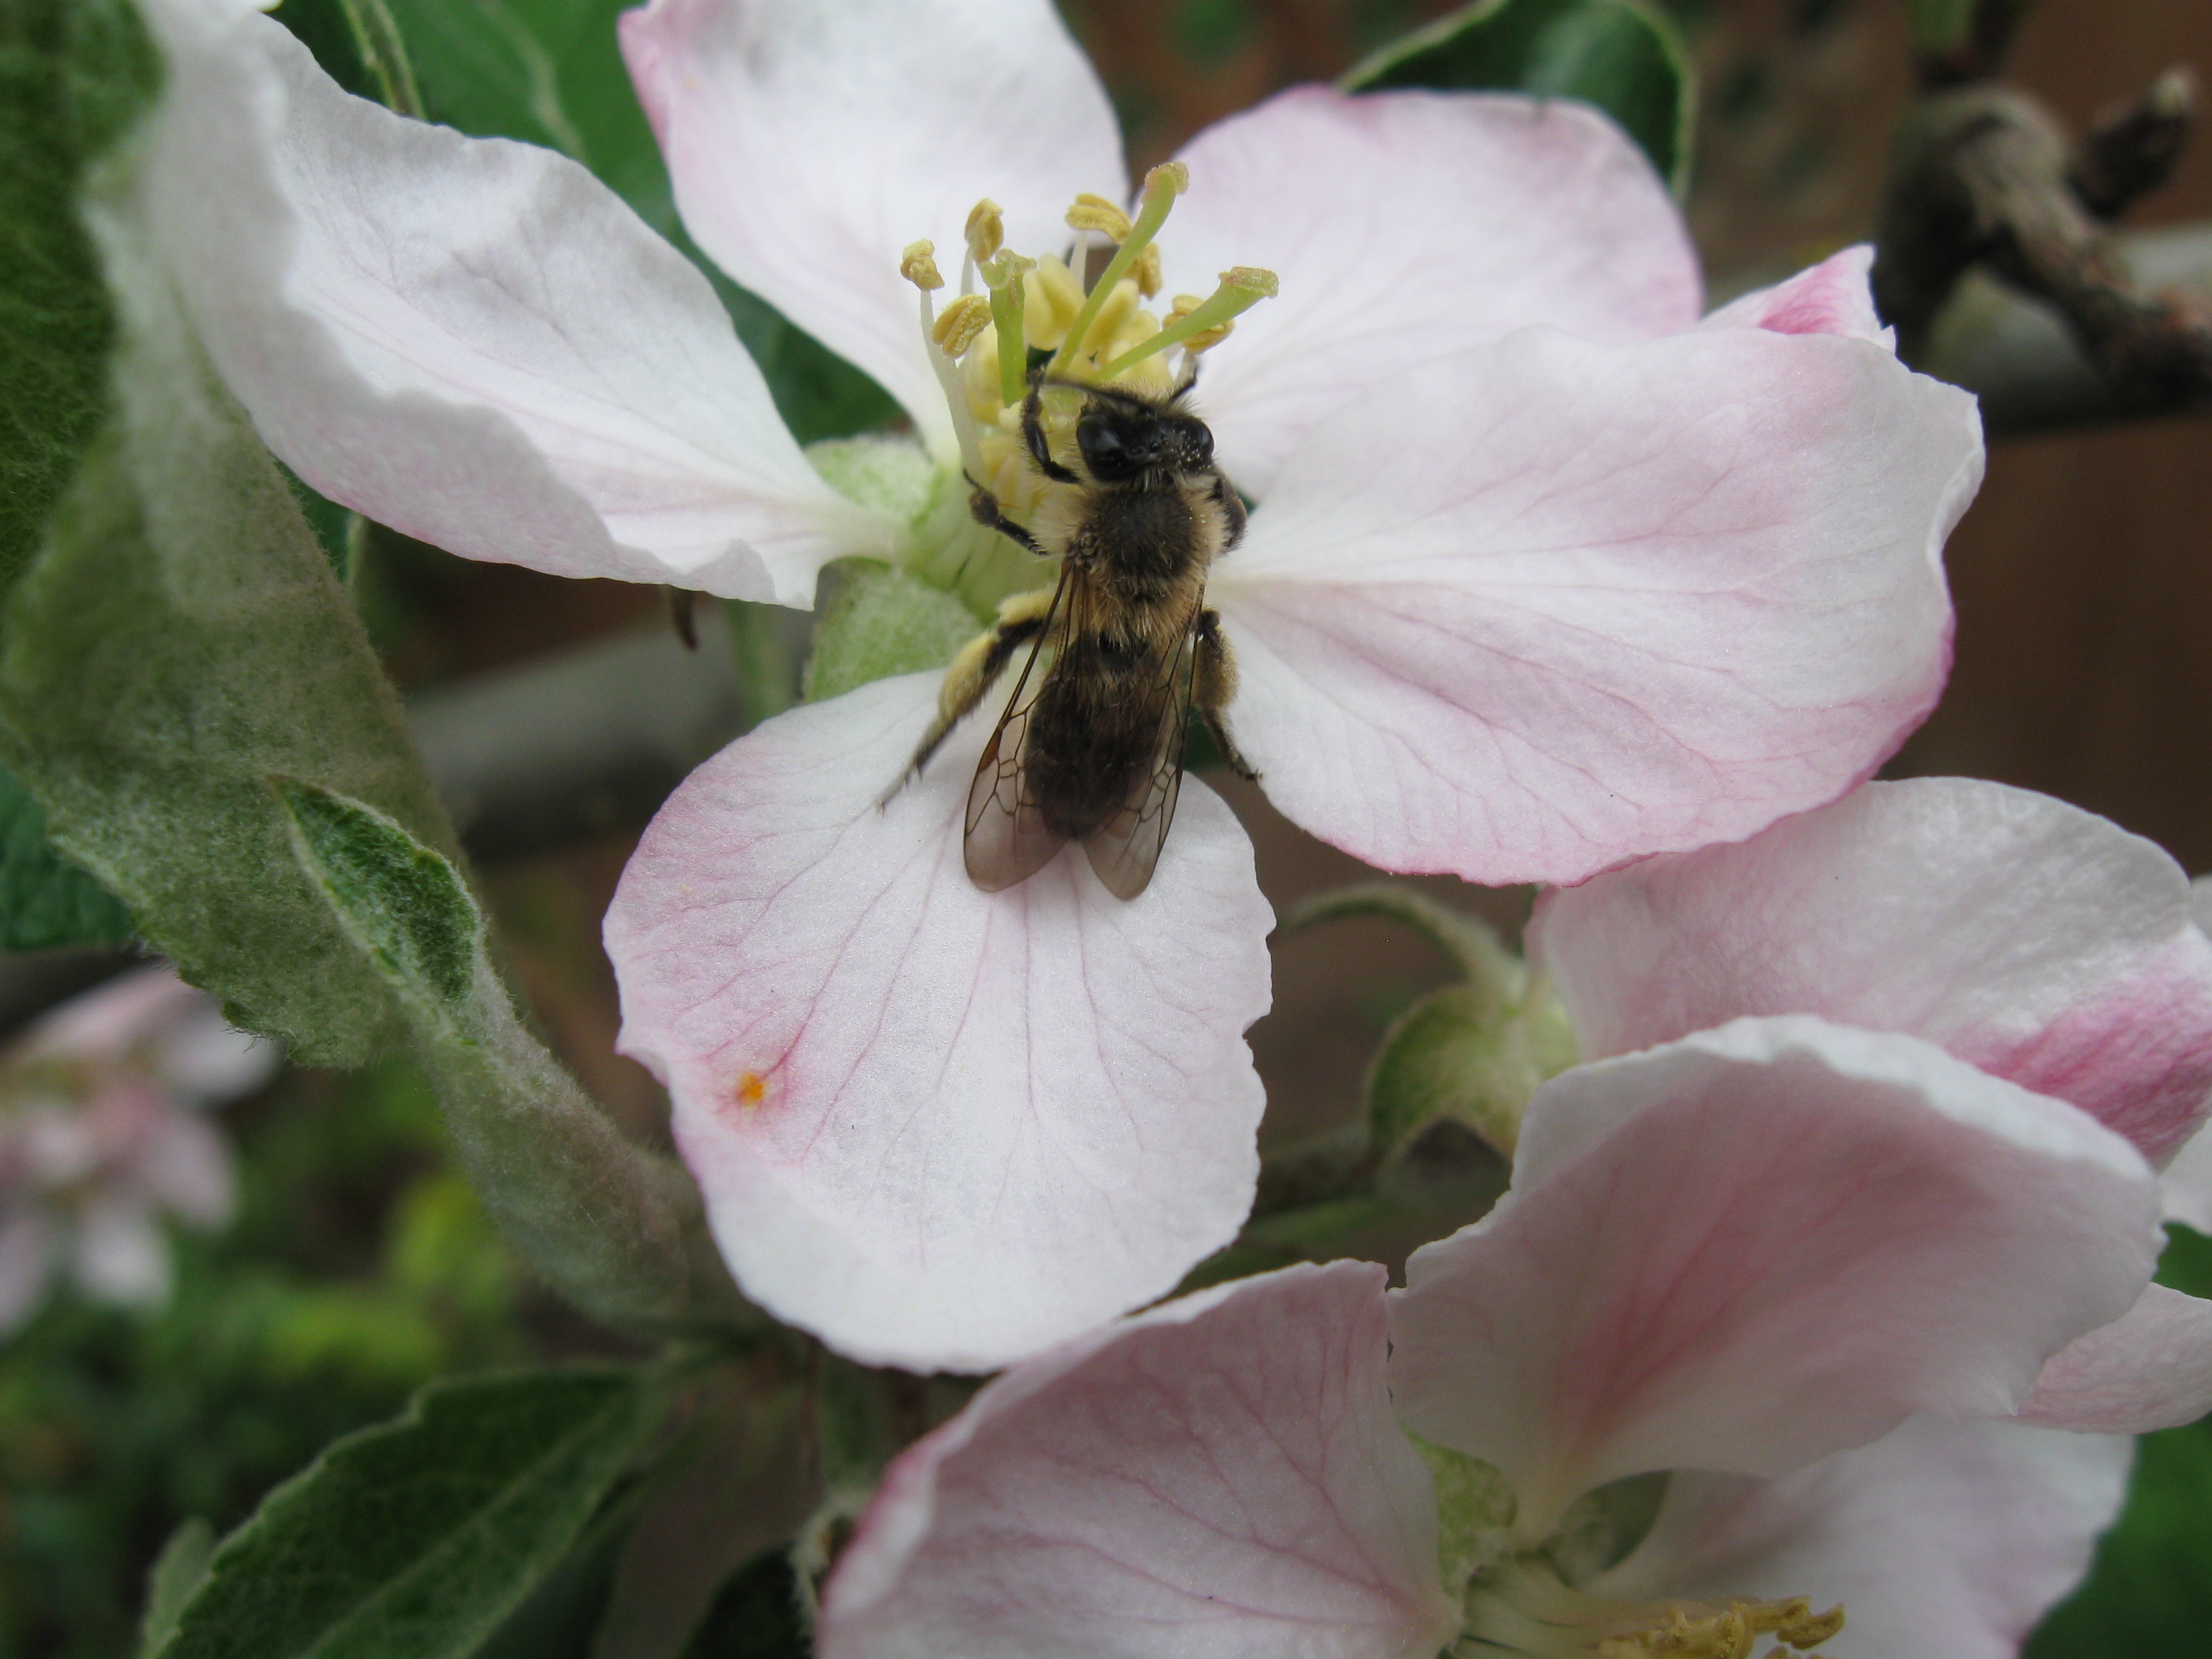 A mining bee works in an open pink-and-white apple blossom.